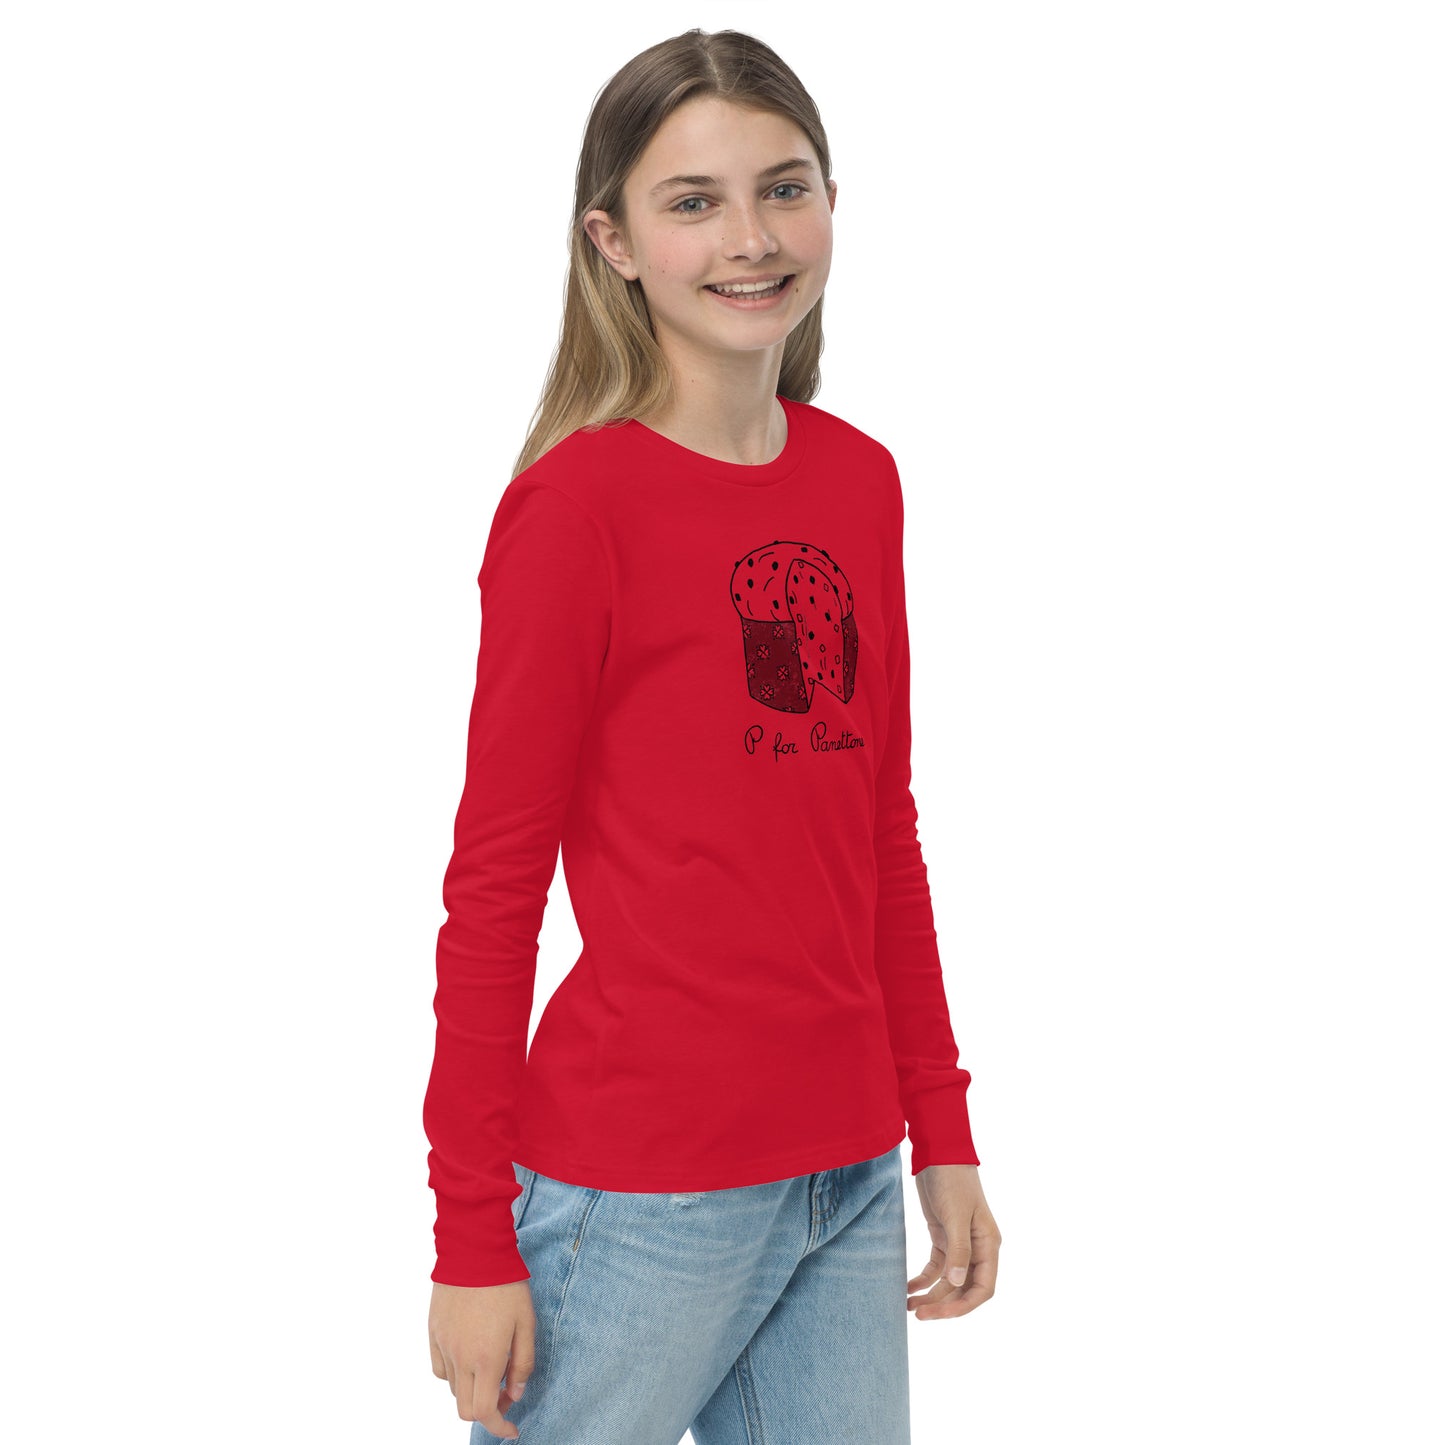 Panettone on a Youth long sleeve tee